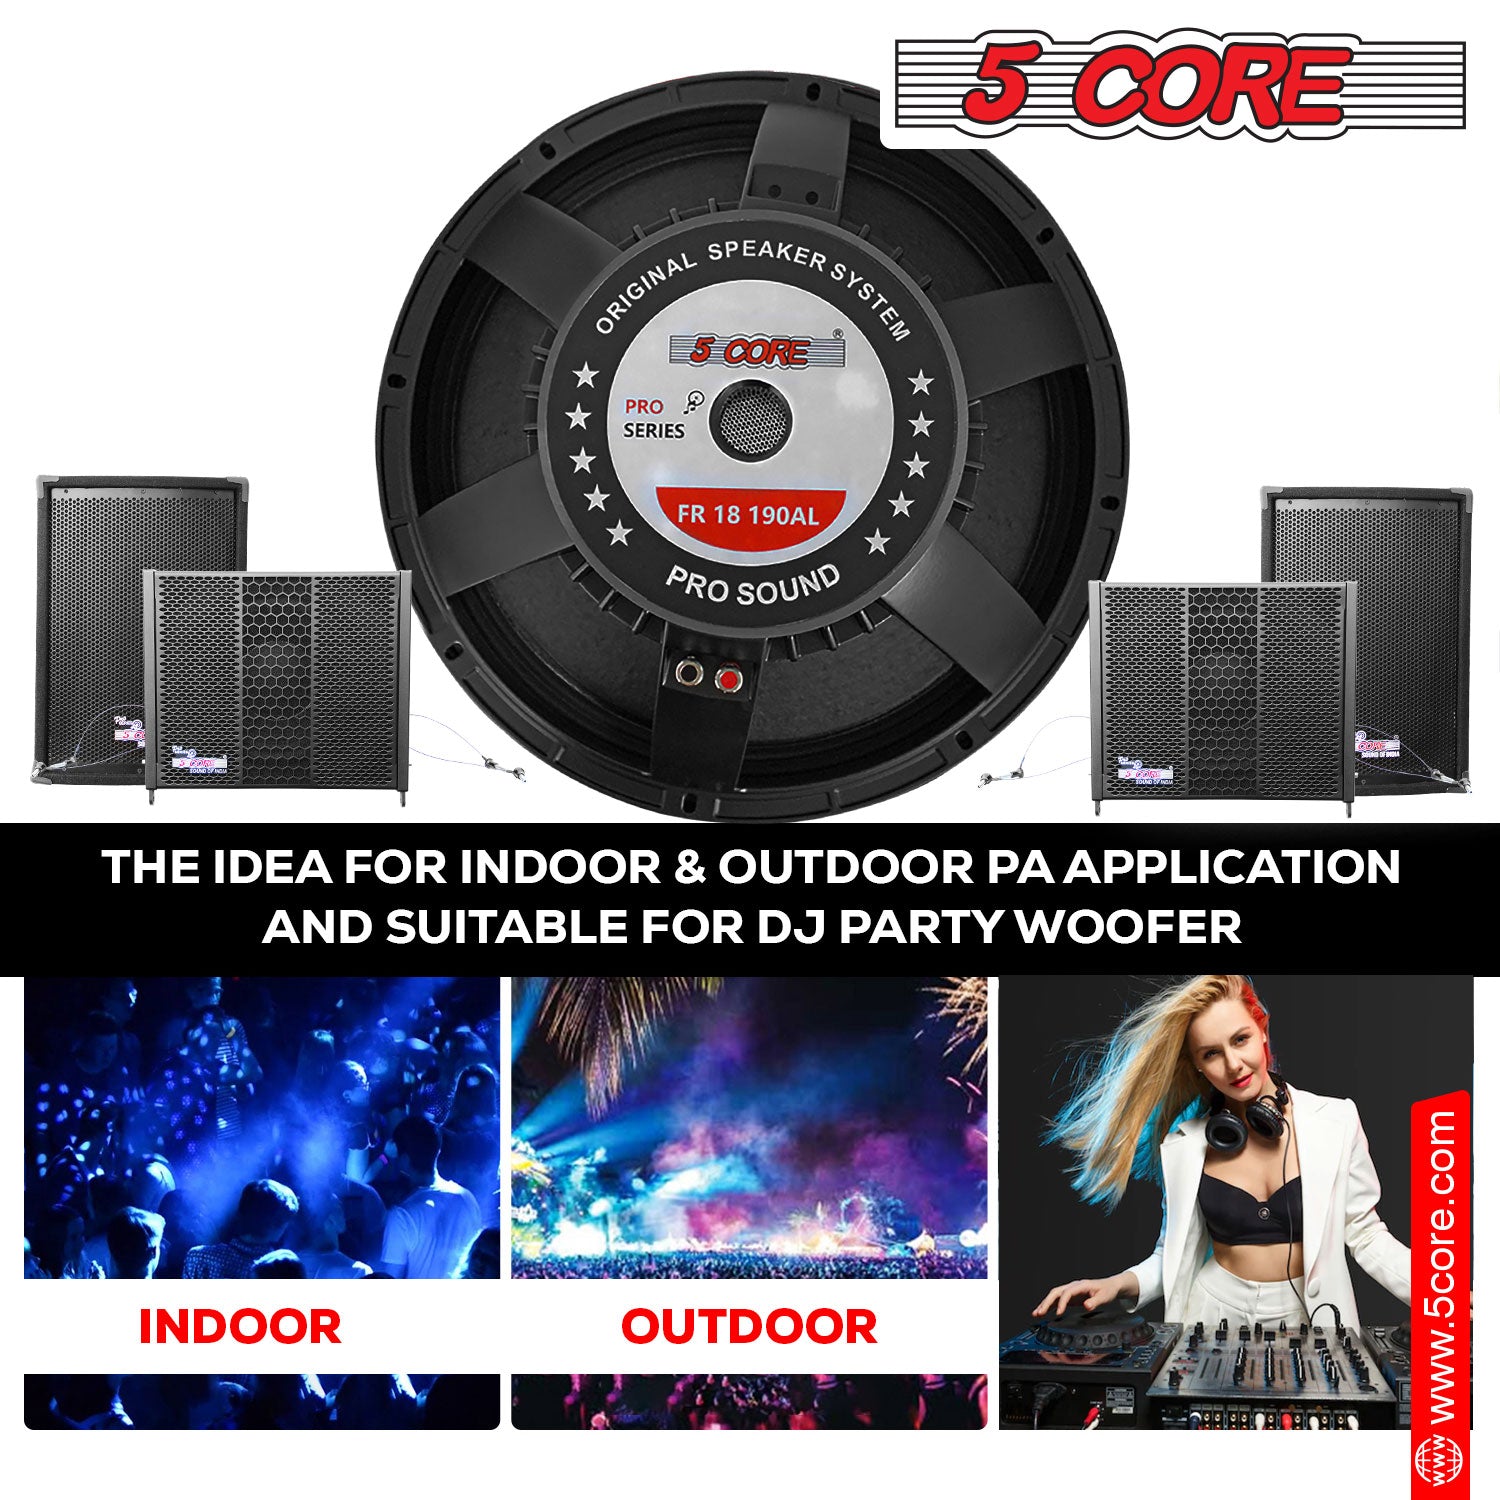 5 core 15 inch subwoofer ideal for indoor and outdoor application and suitable for dj party woofer